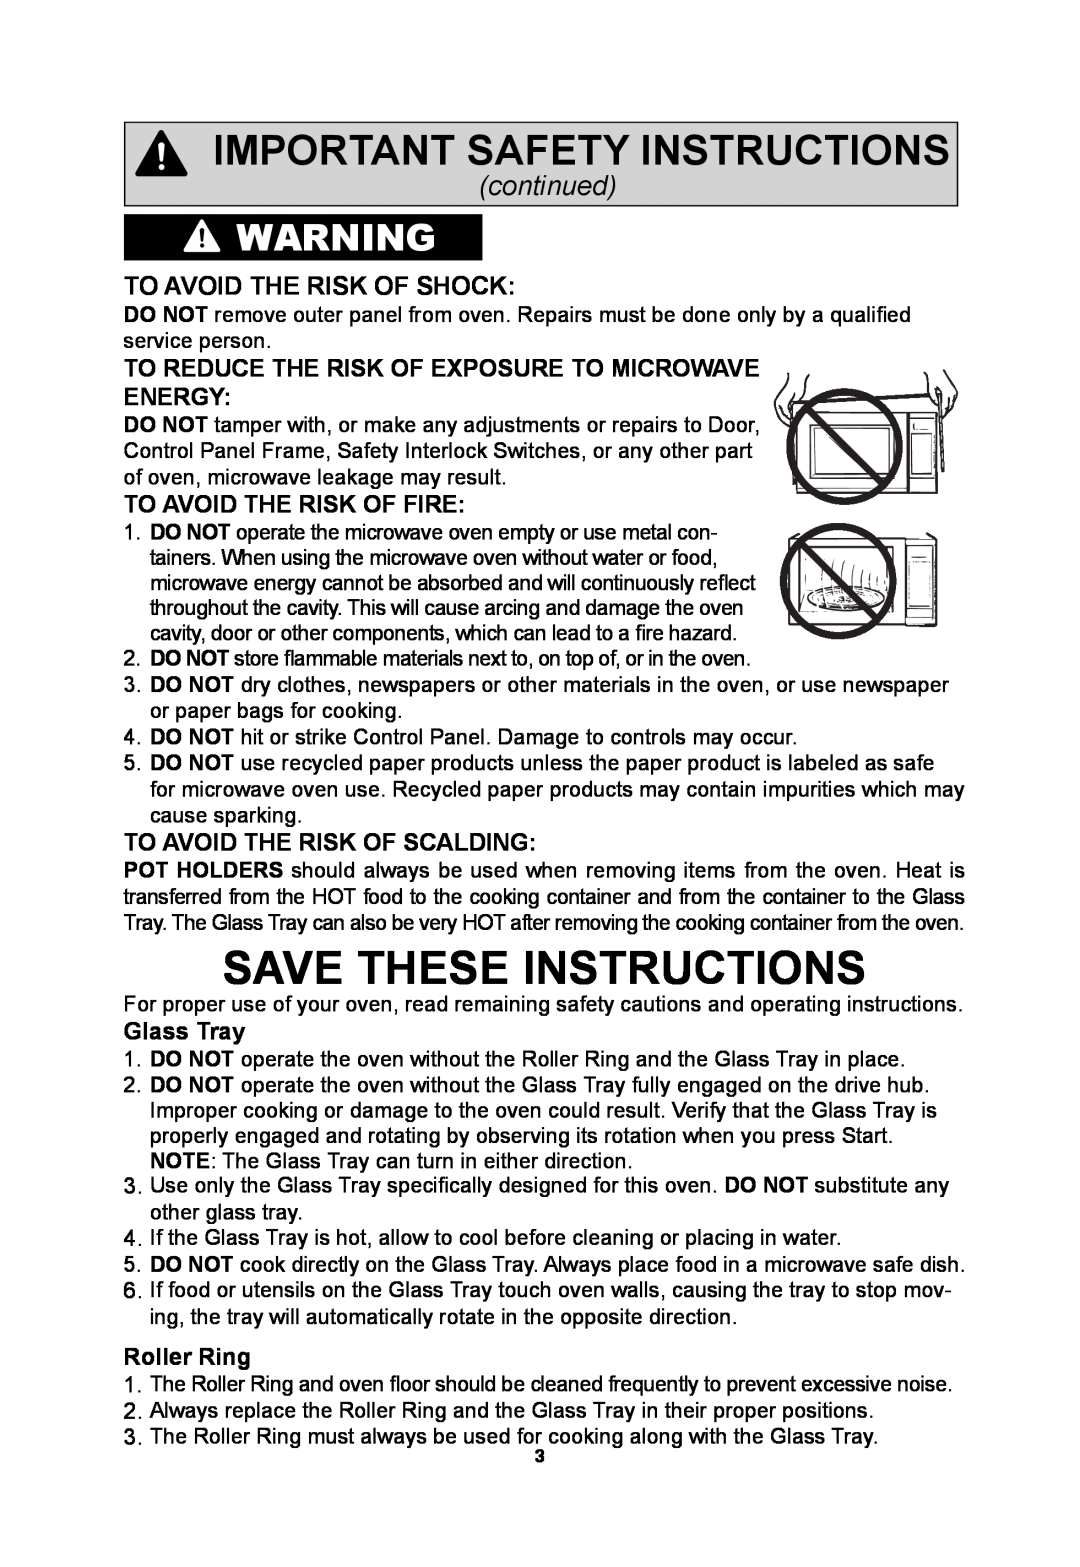 Panasonic NNSN973S Save These Instructions, To Avoid The Risk Of Shock, Important Safety Instructions, continued 